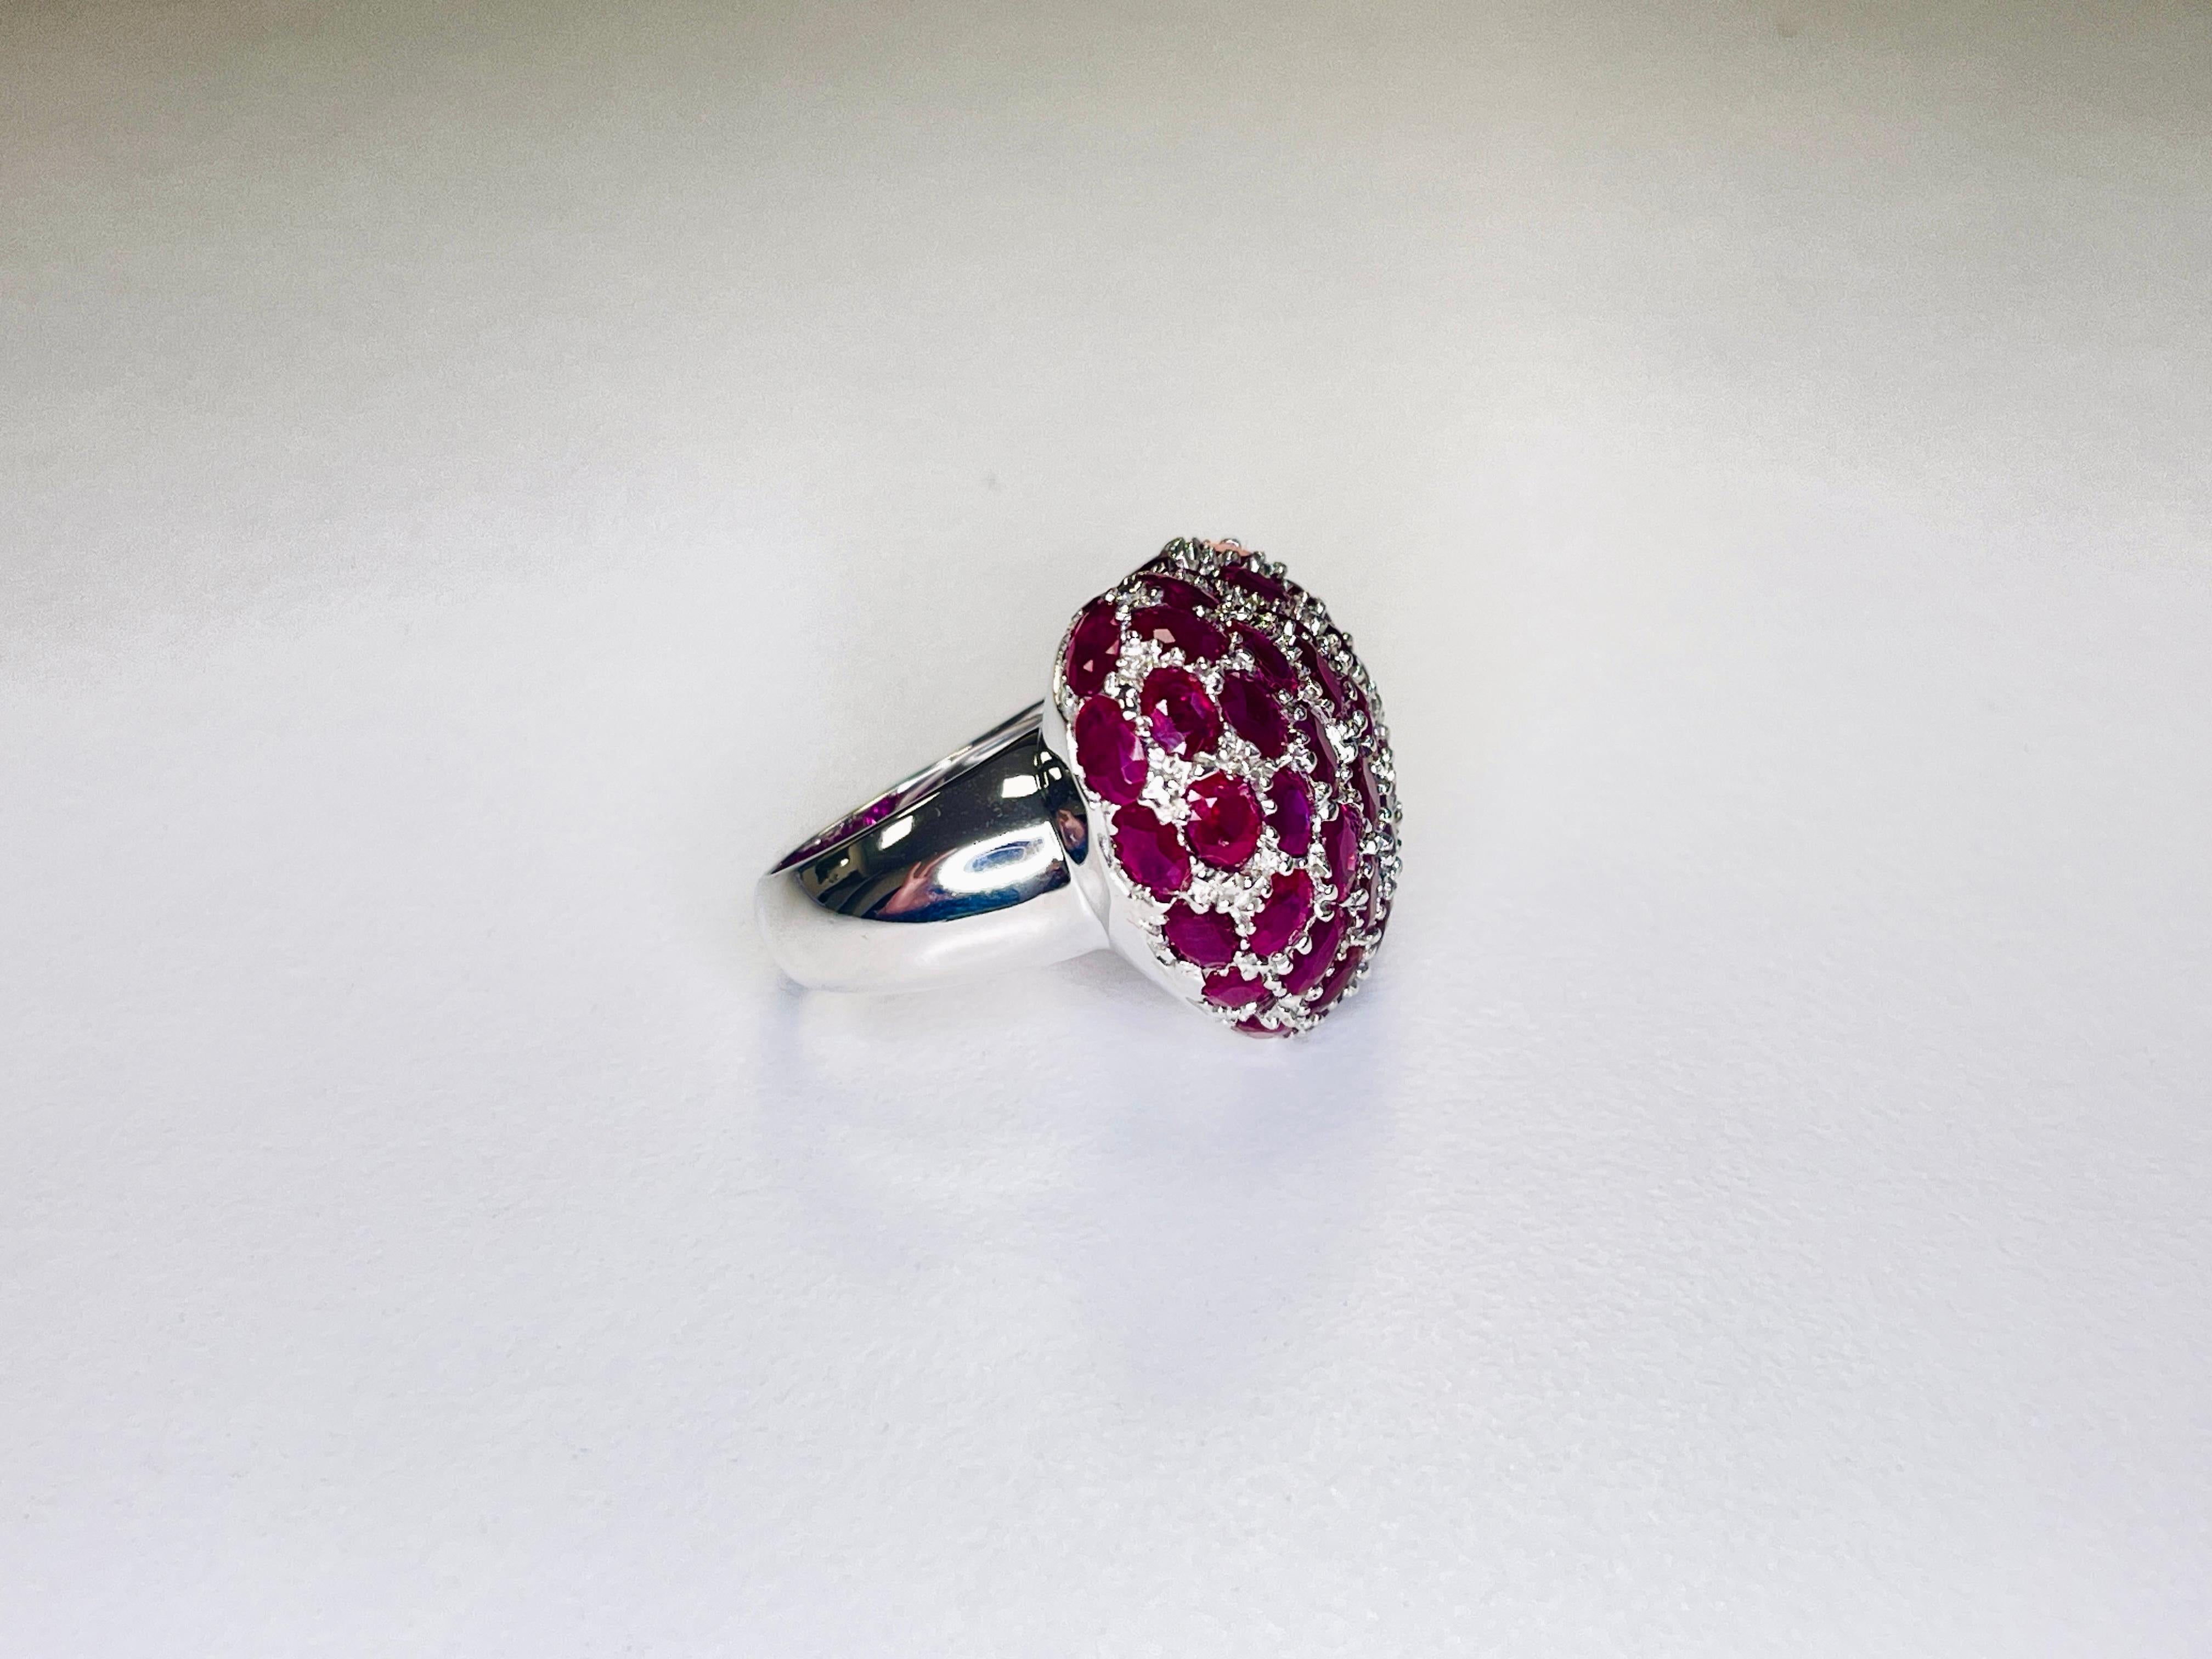 16.50cts White Gold Heart Ruby Oval Shape High Polished Rhodium Ring 18K 7 Inch 1